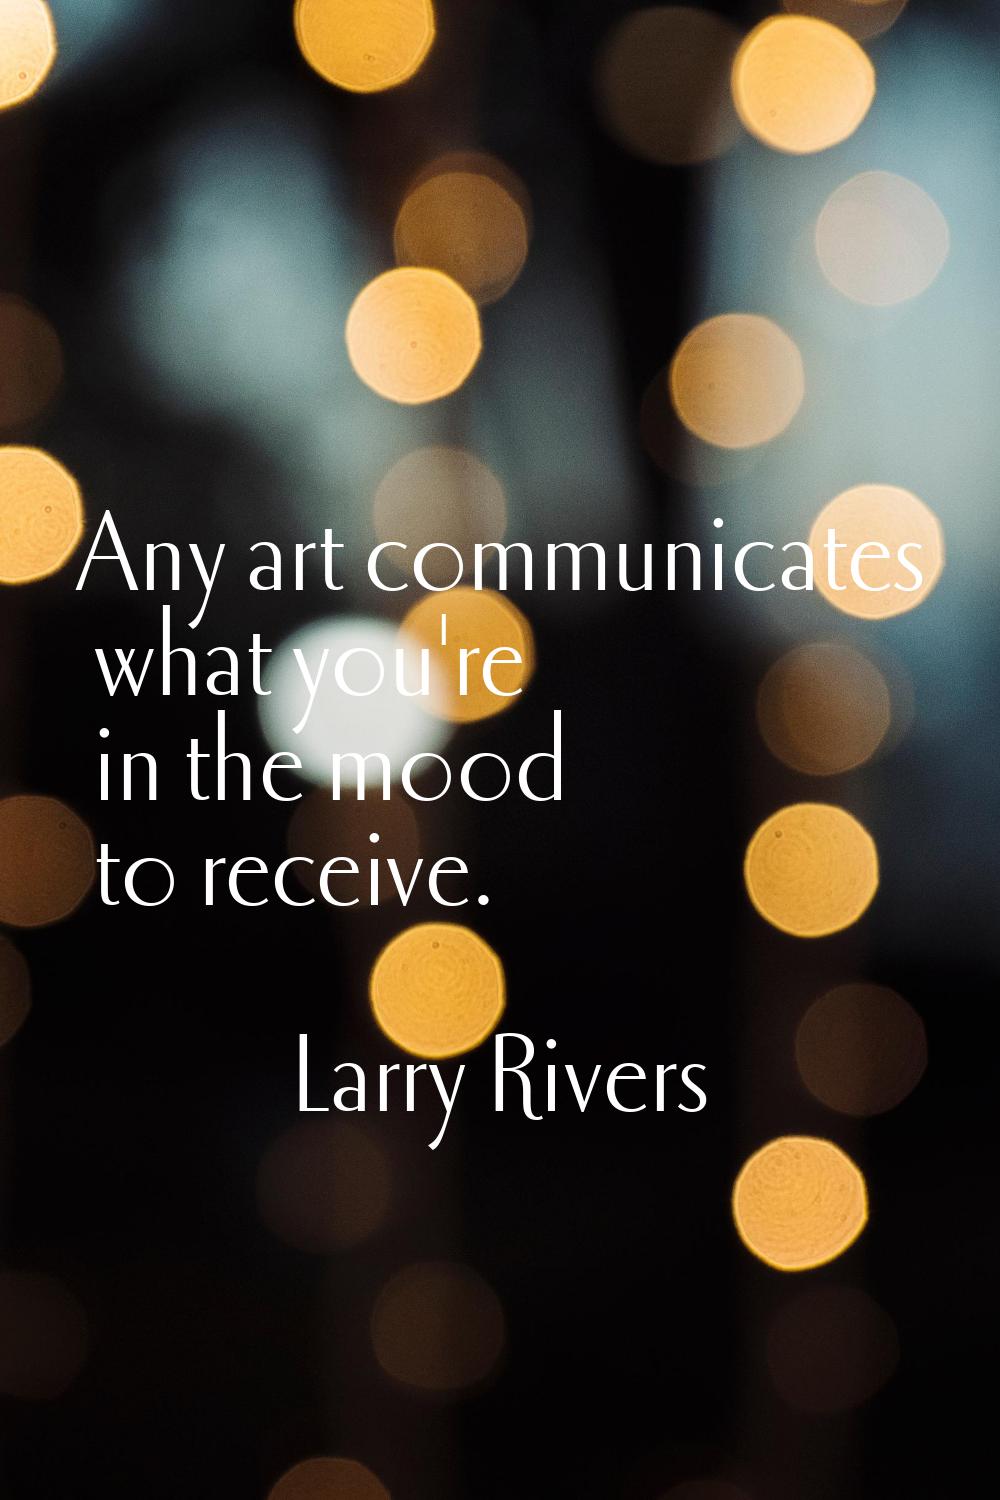 Any art communicates what you're in the mood to receive.